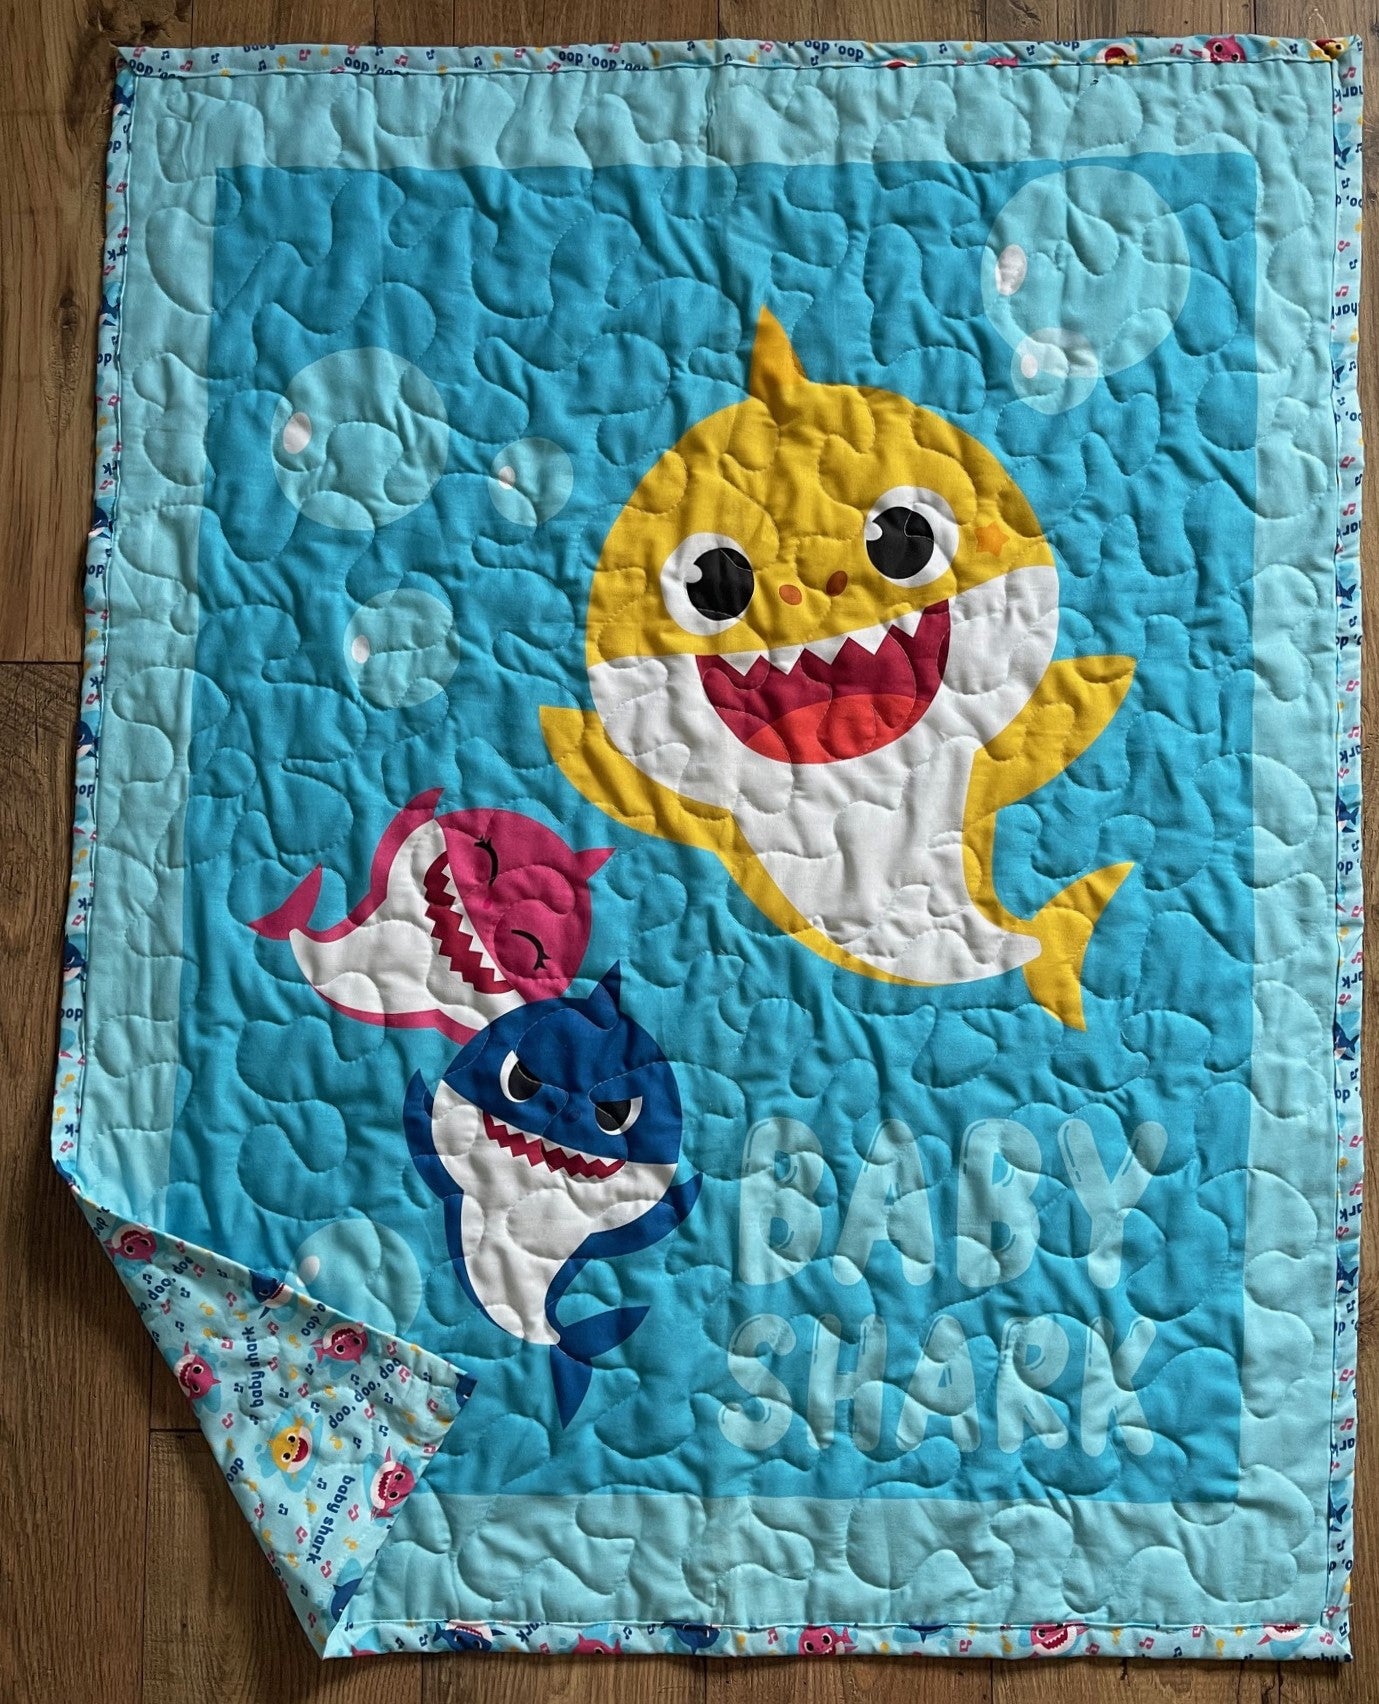 BABY SHARK CARTOON Inspired 36"x44" QUILTED BLANKET